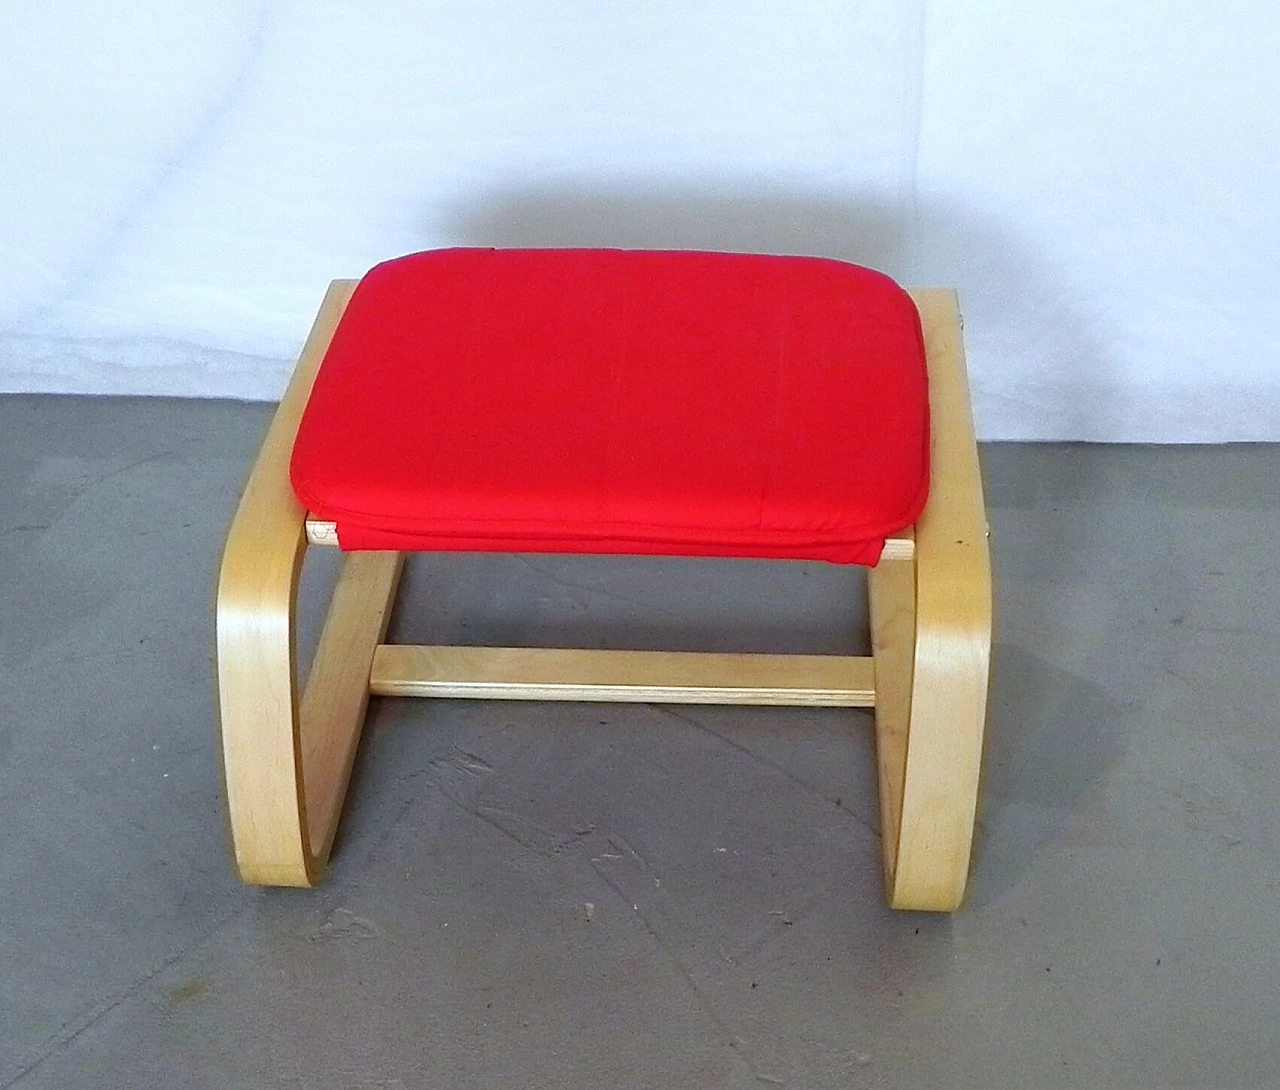 Birch bentwood stool with padded seat 16